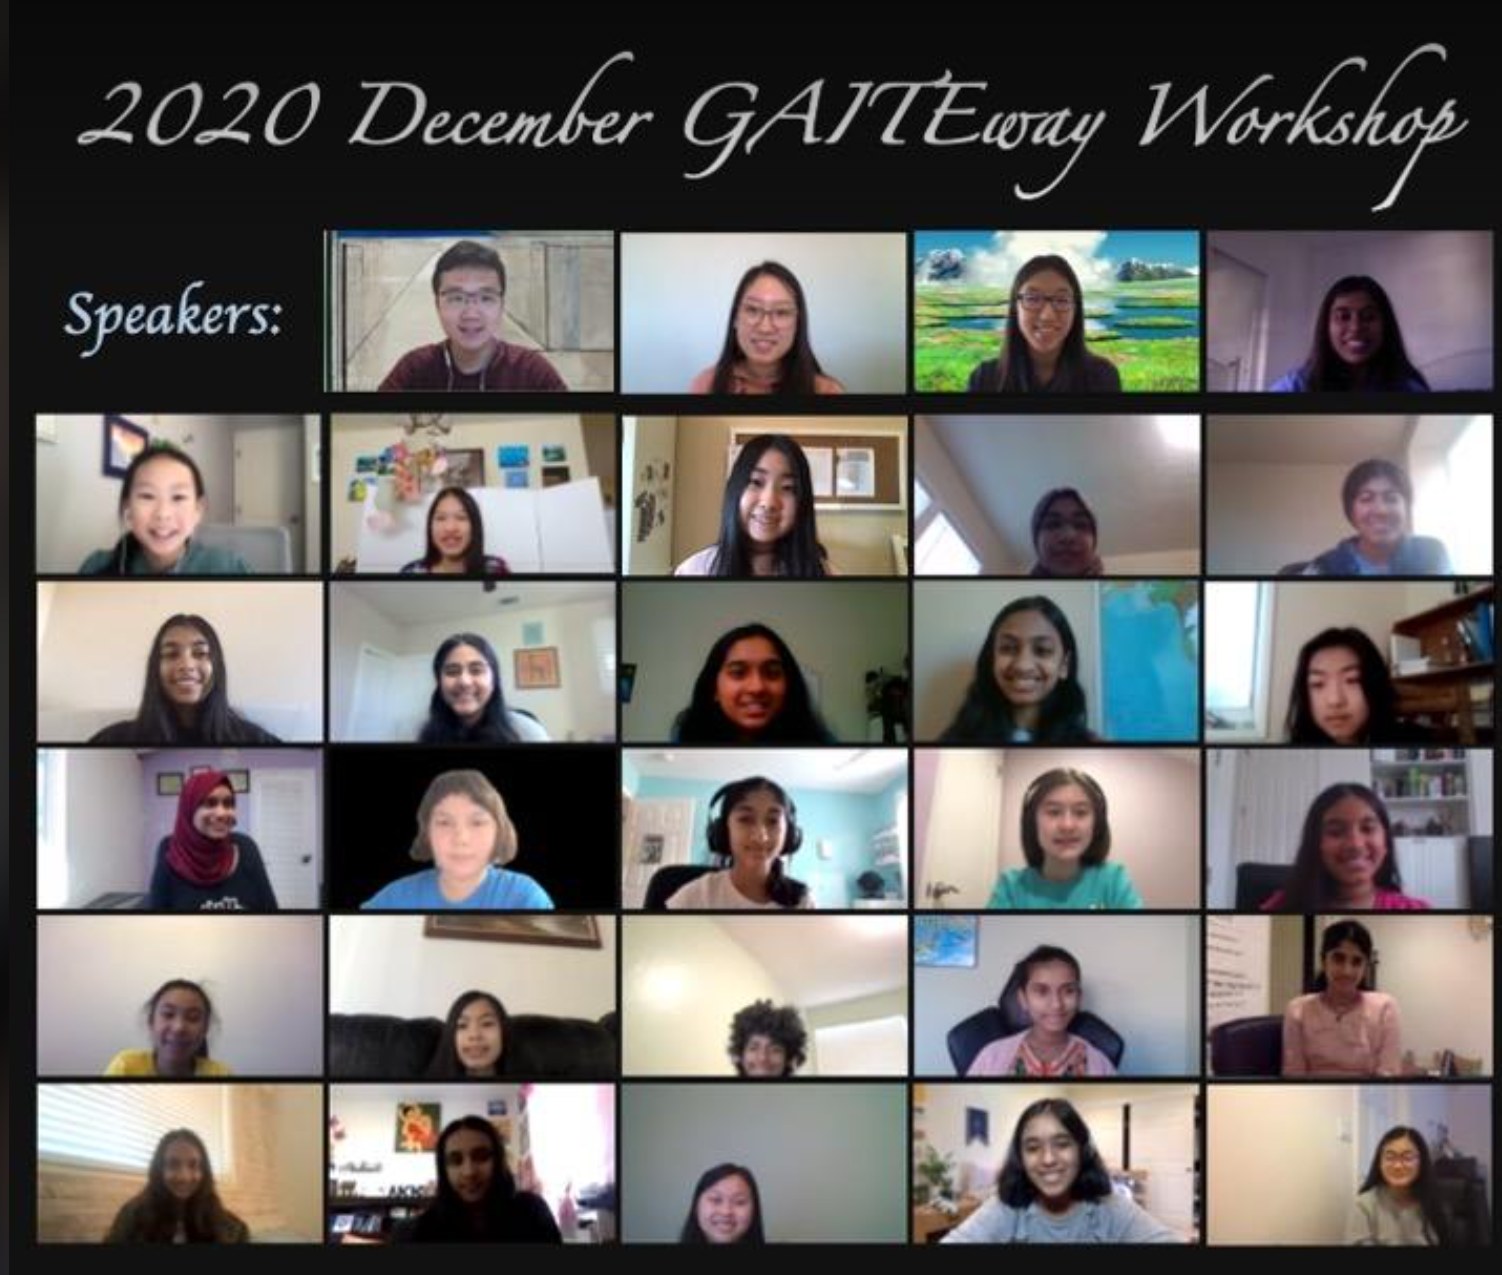 AI Workshop I hosted as President of GAITEway(Girls in AI and Tech Education)